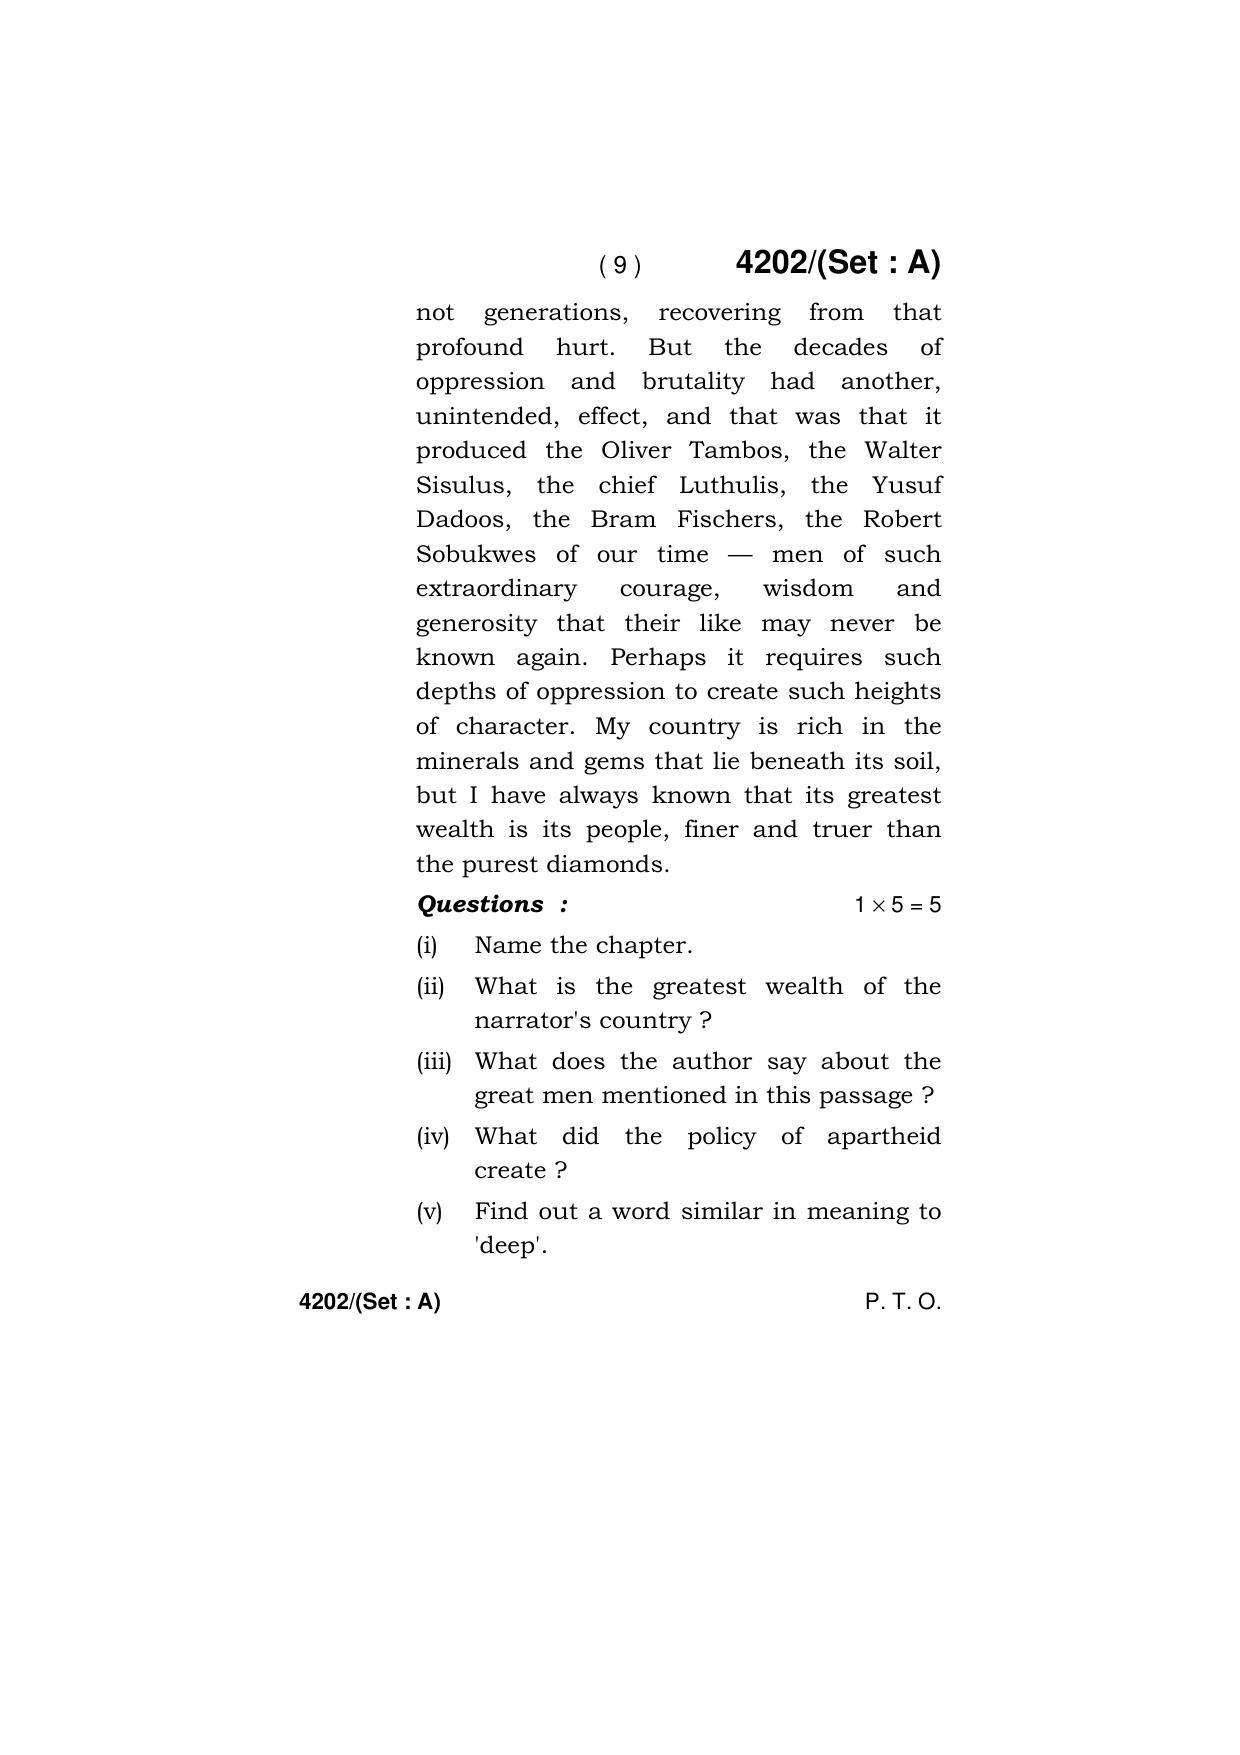 Haryana Board HBSE Class 10 English (All Set) 2019 Question Paper - Page 9